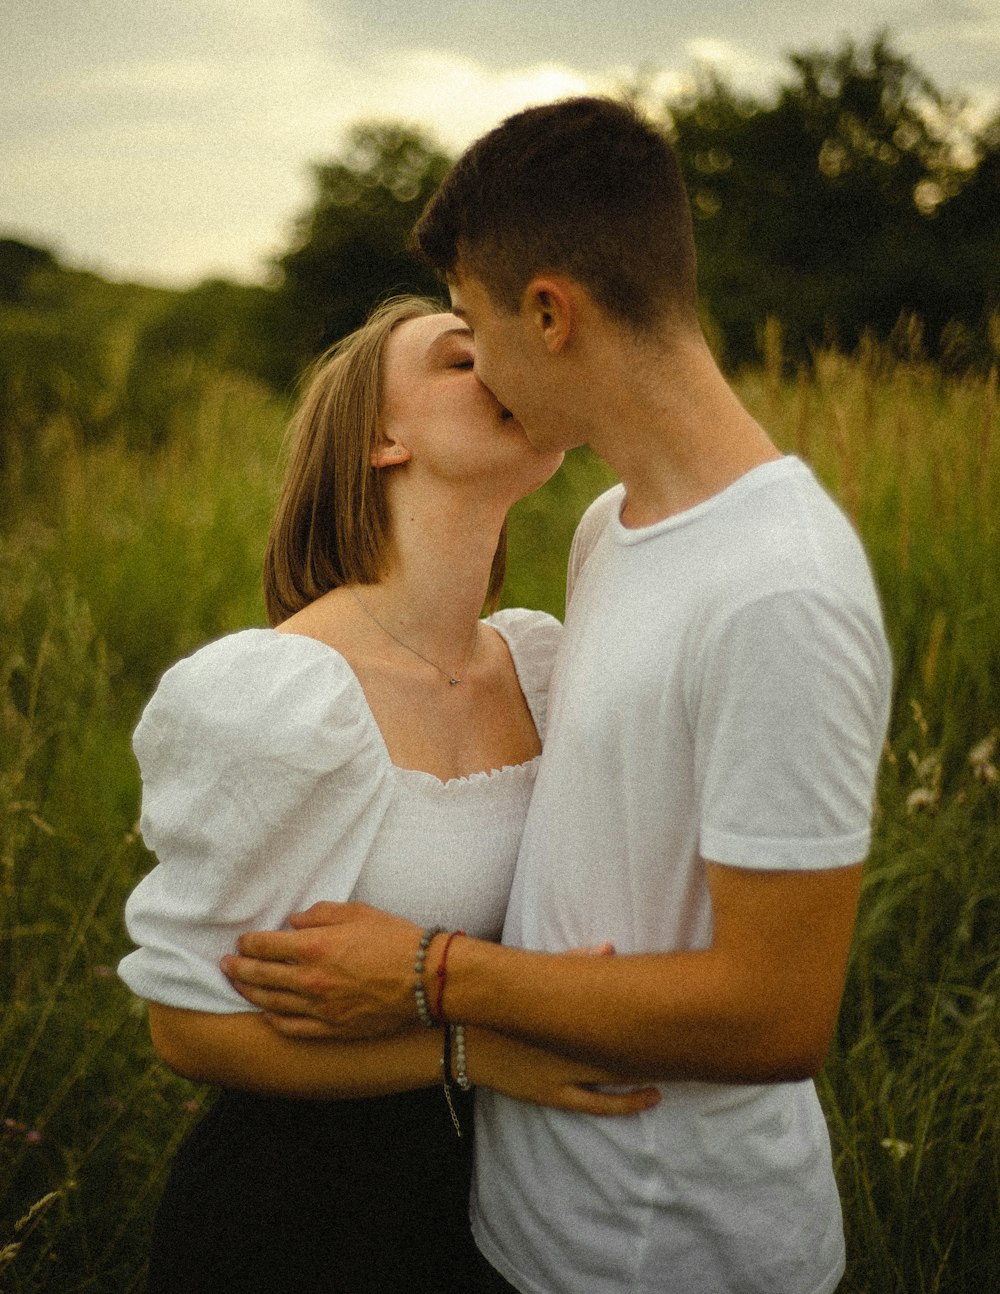 man in white shirt kissing woman in white shirt on green grass field during daytime